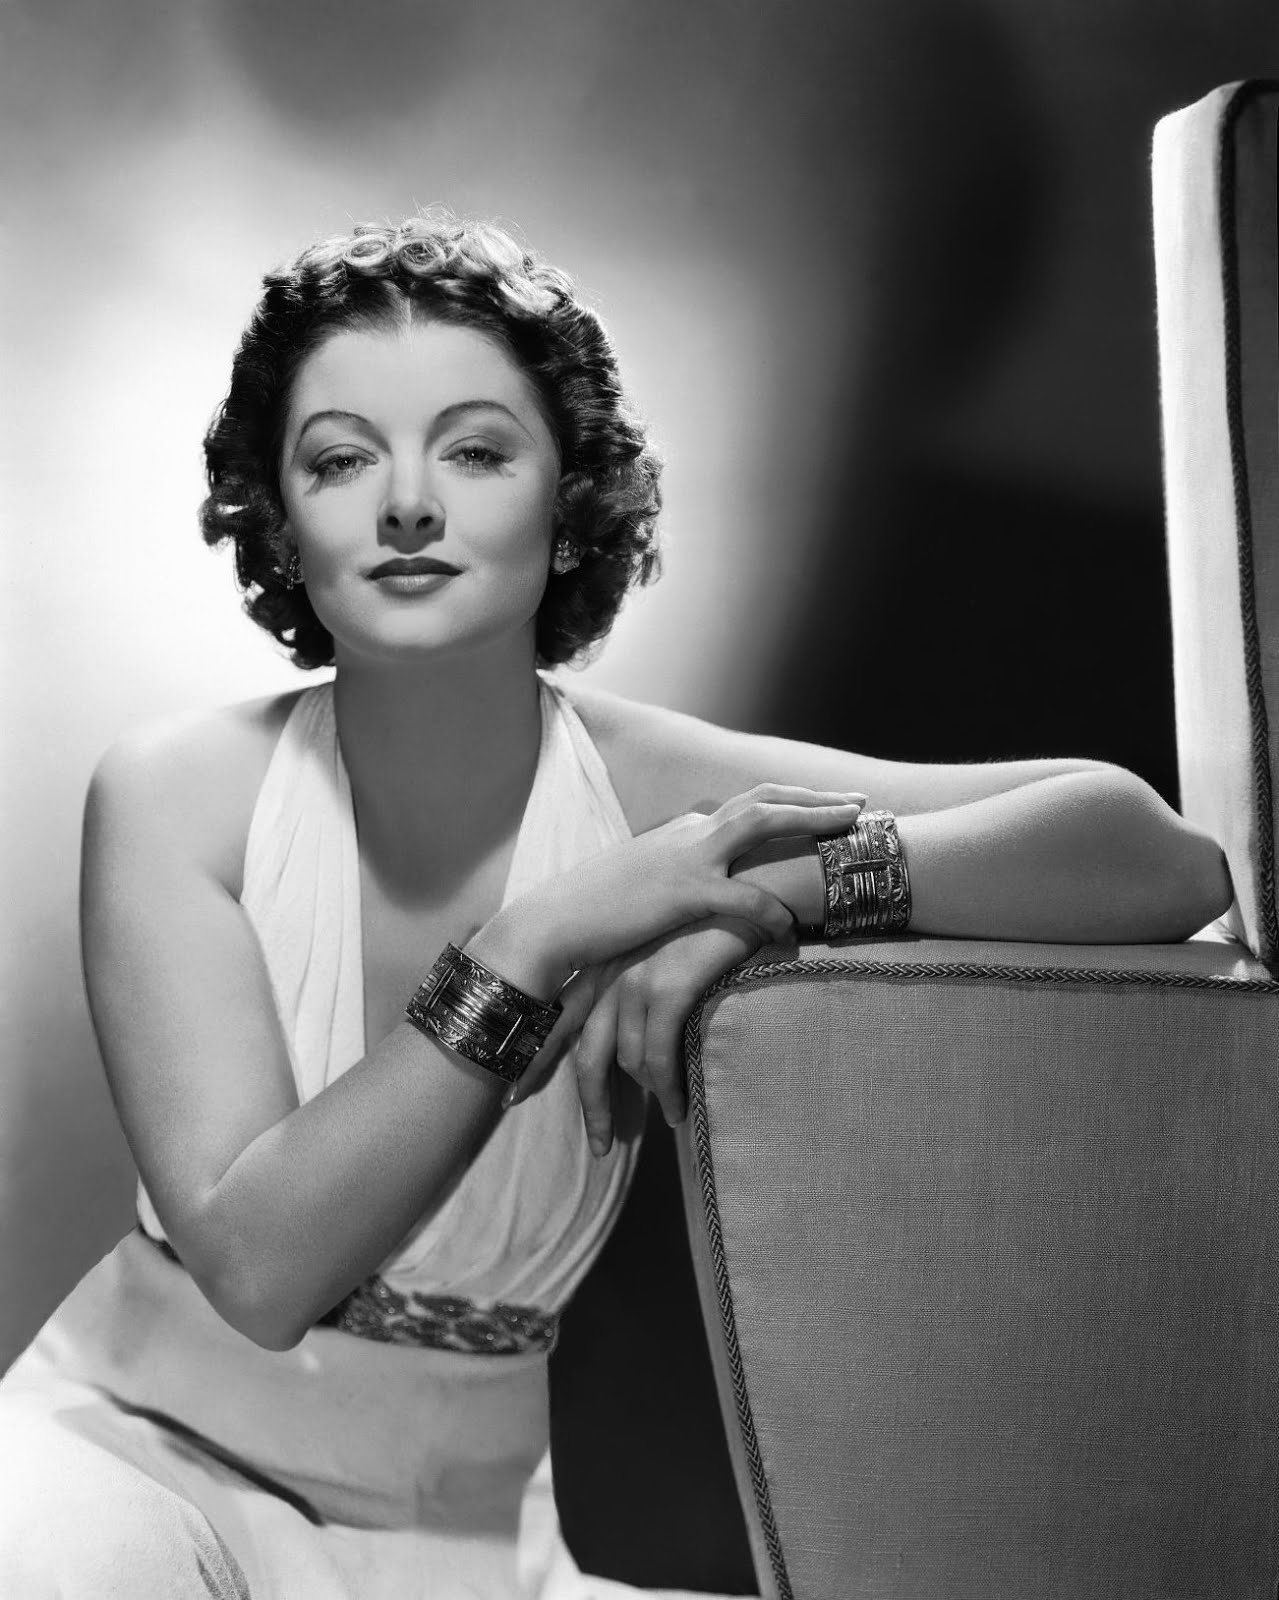 Myrna Loy - Hollywood Icon and Actress - Photo Trading Cards Set.